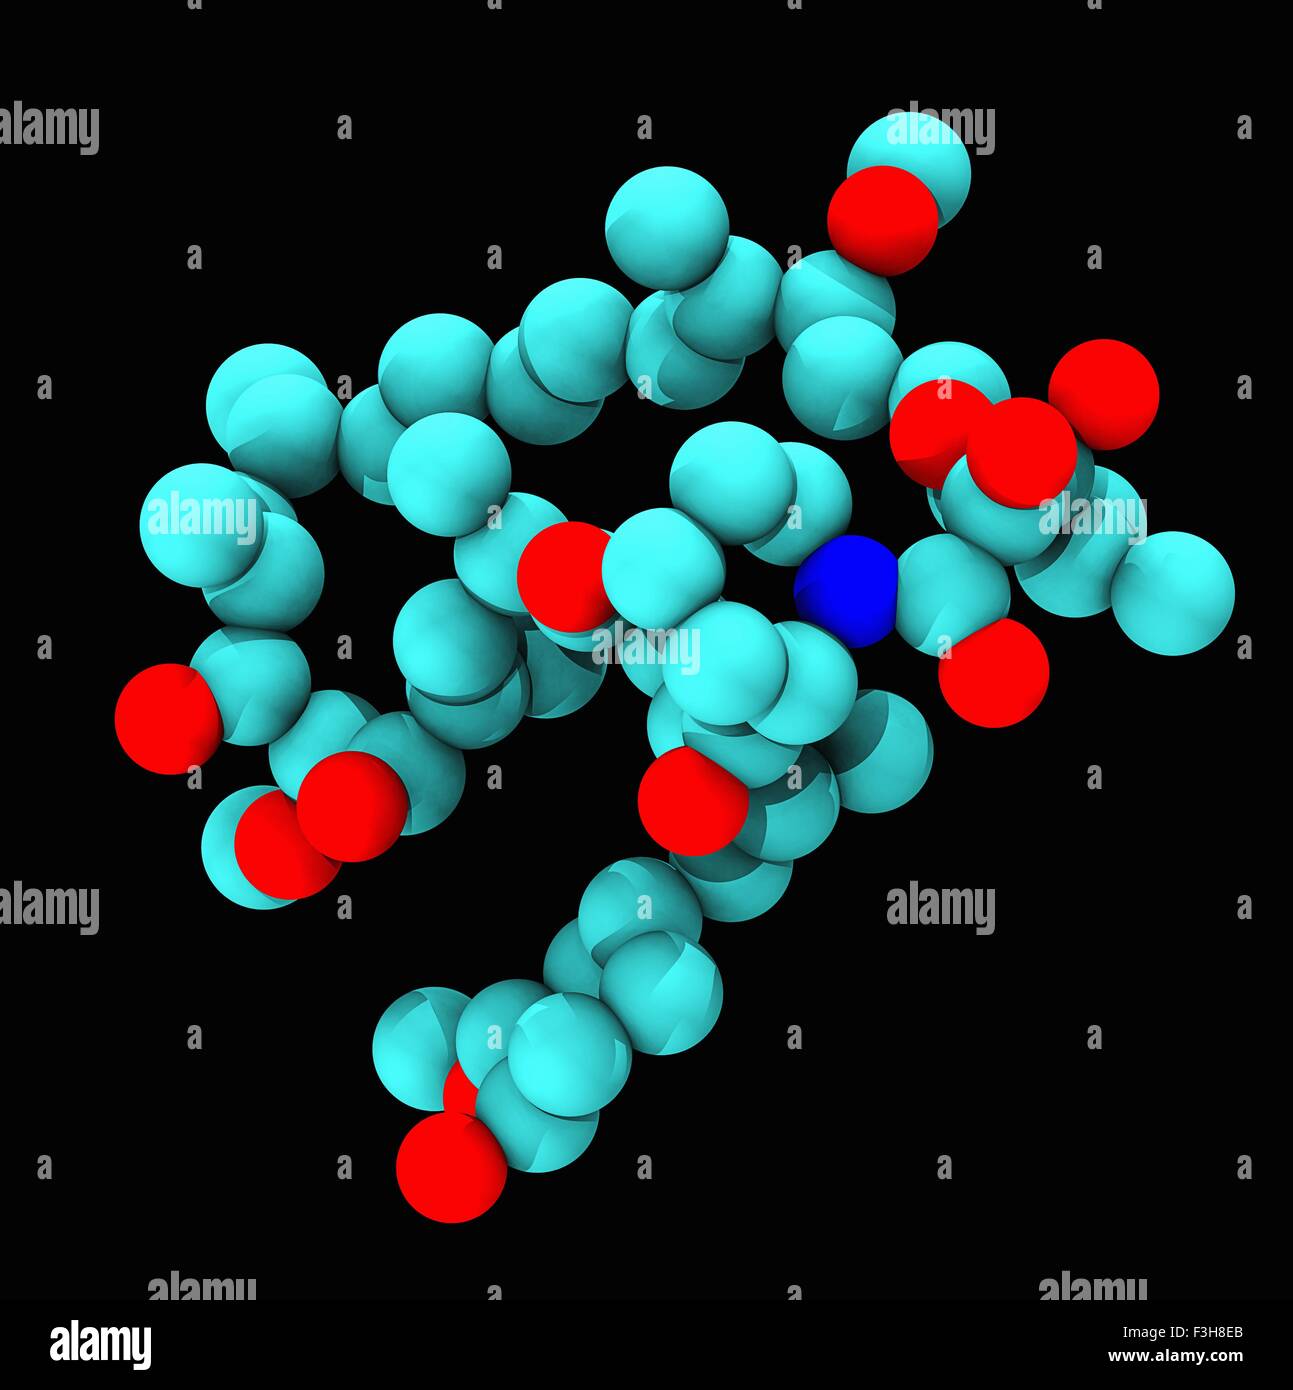 Computer generated molecular model of Sirolimus, also known as rapamycin Stock Photo